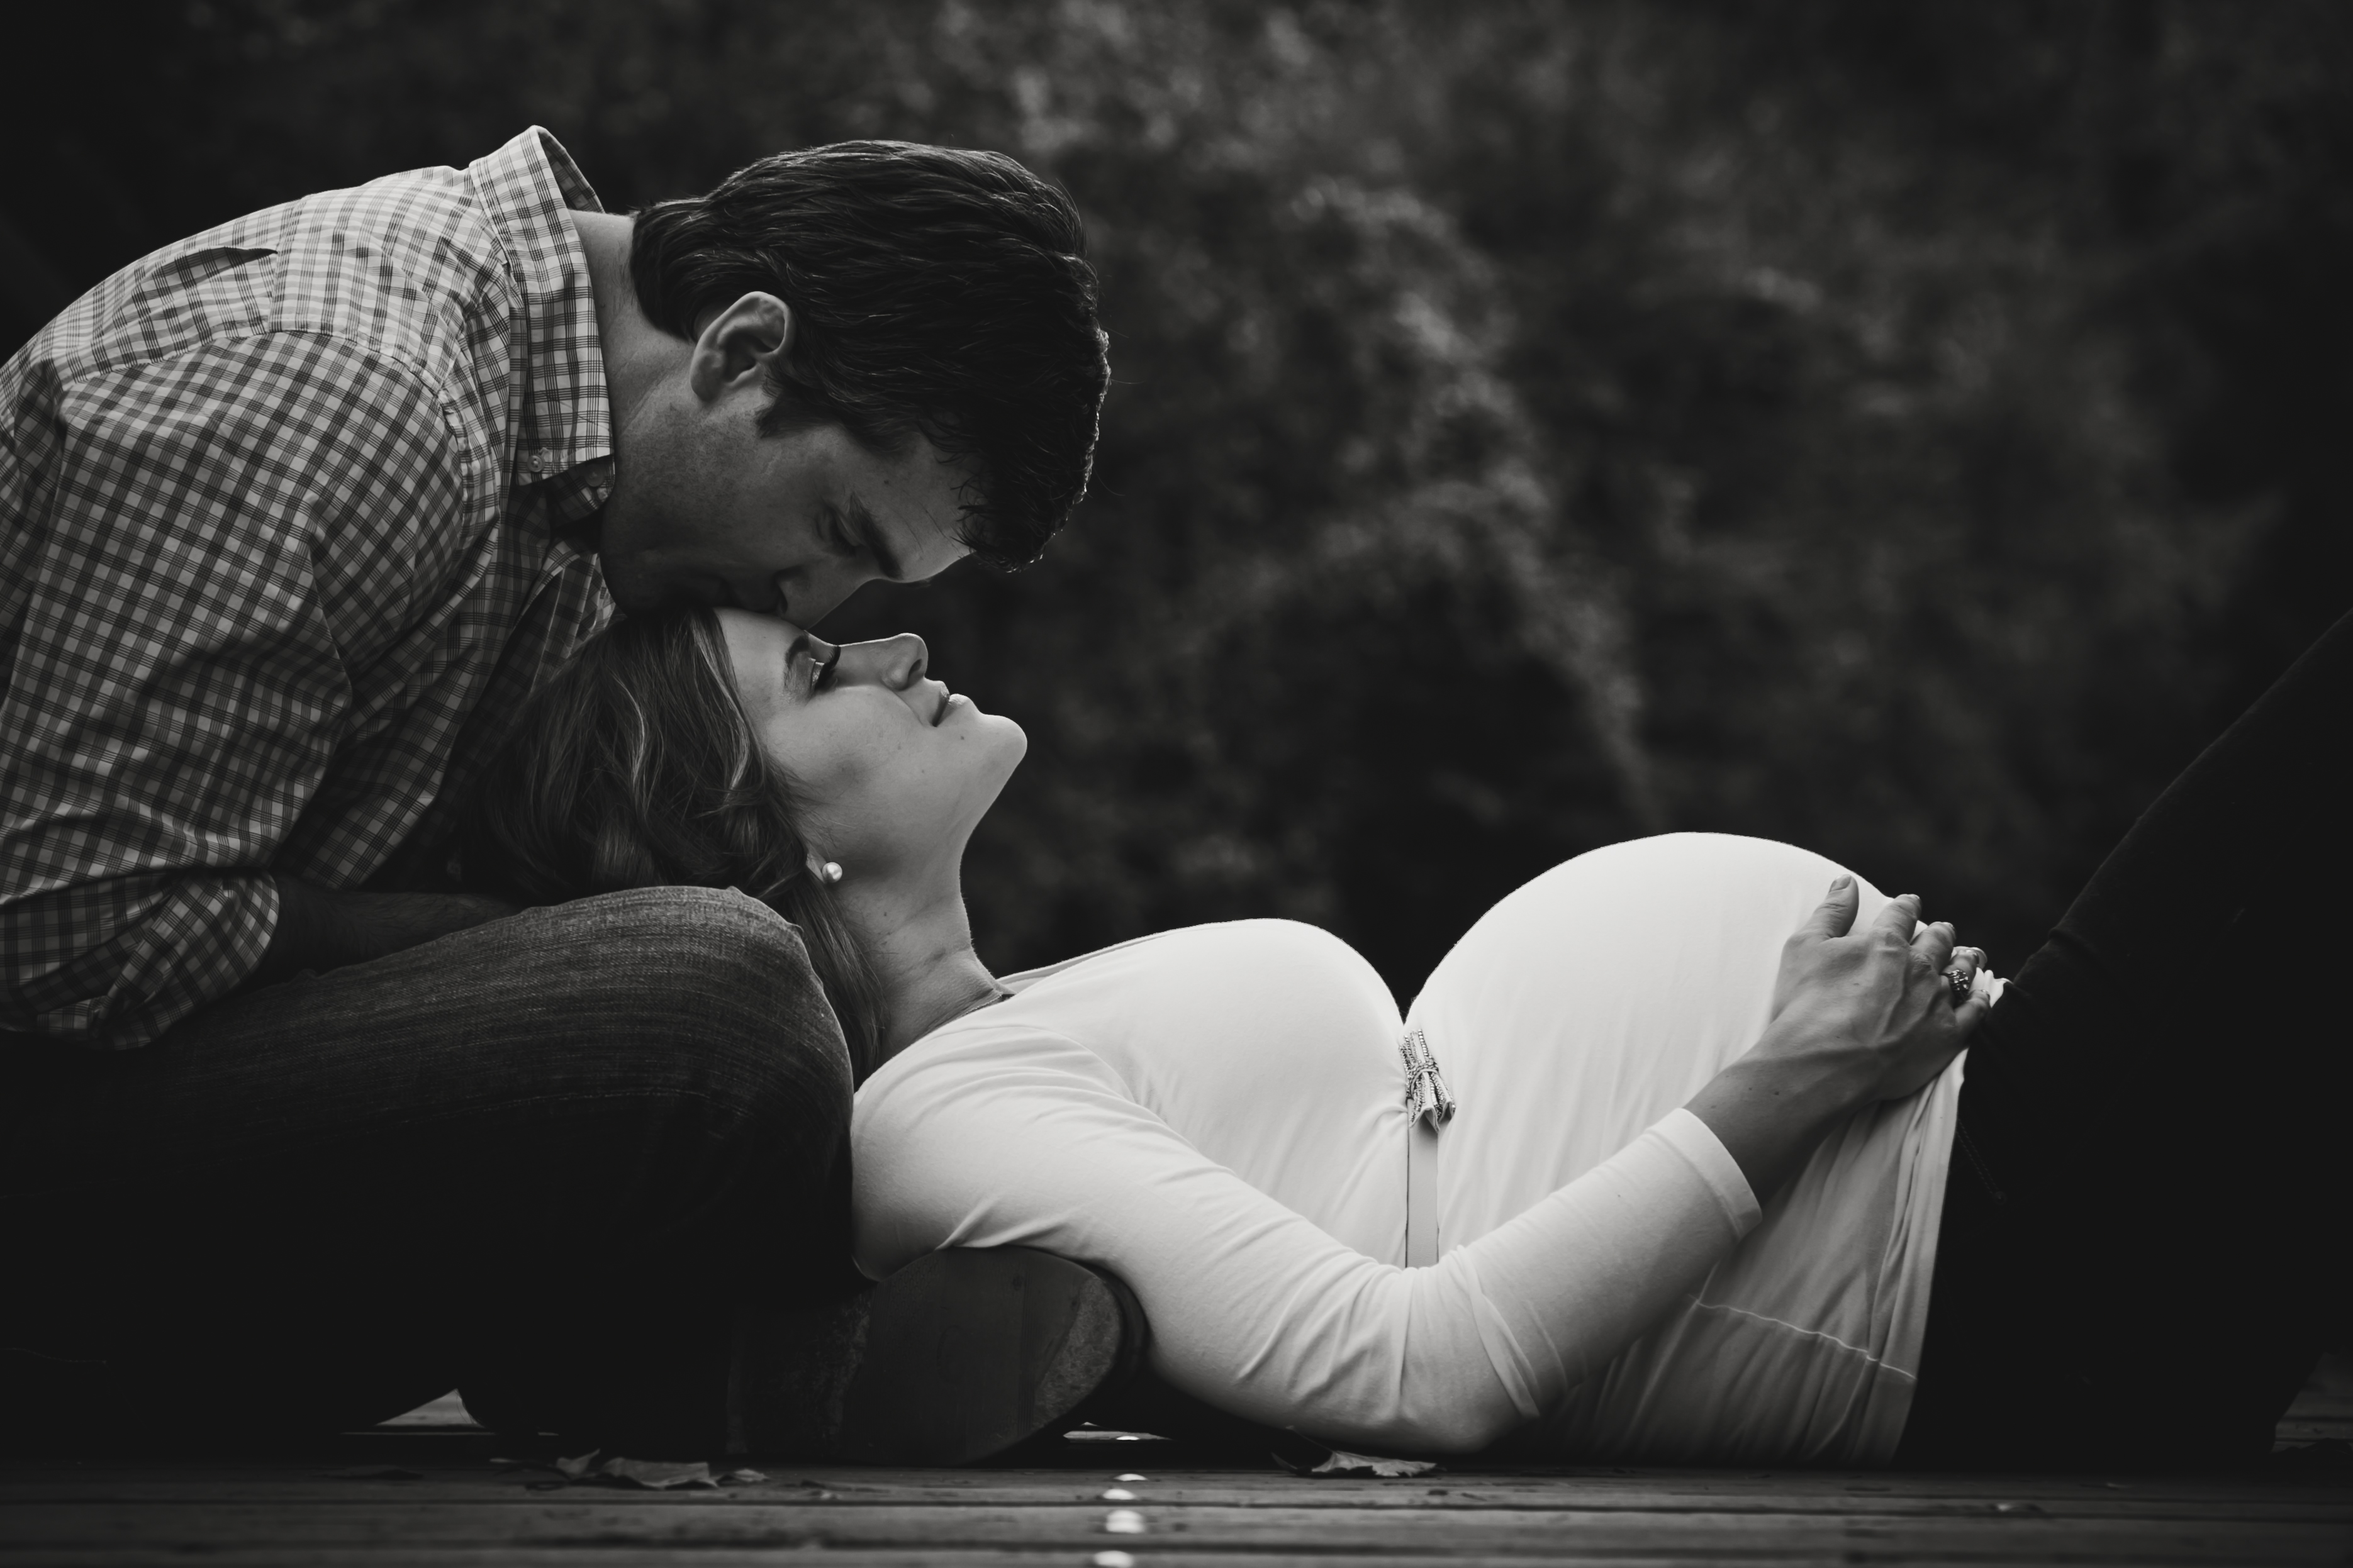 Maternity Photography Raleigh NC